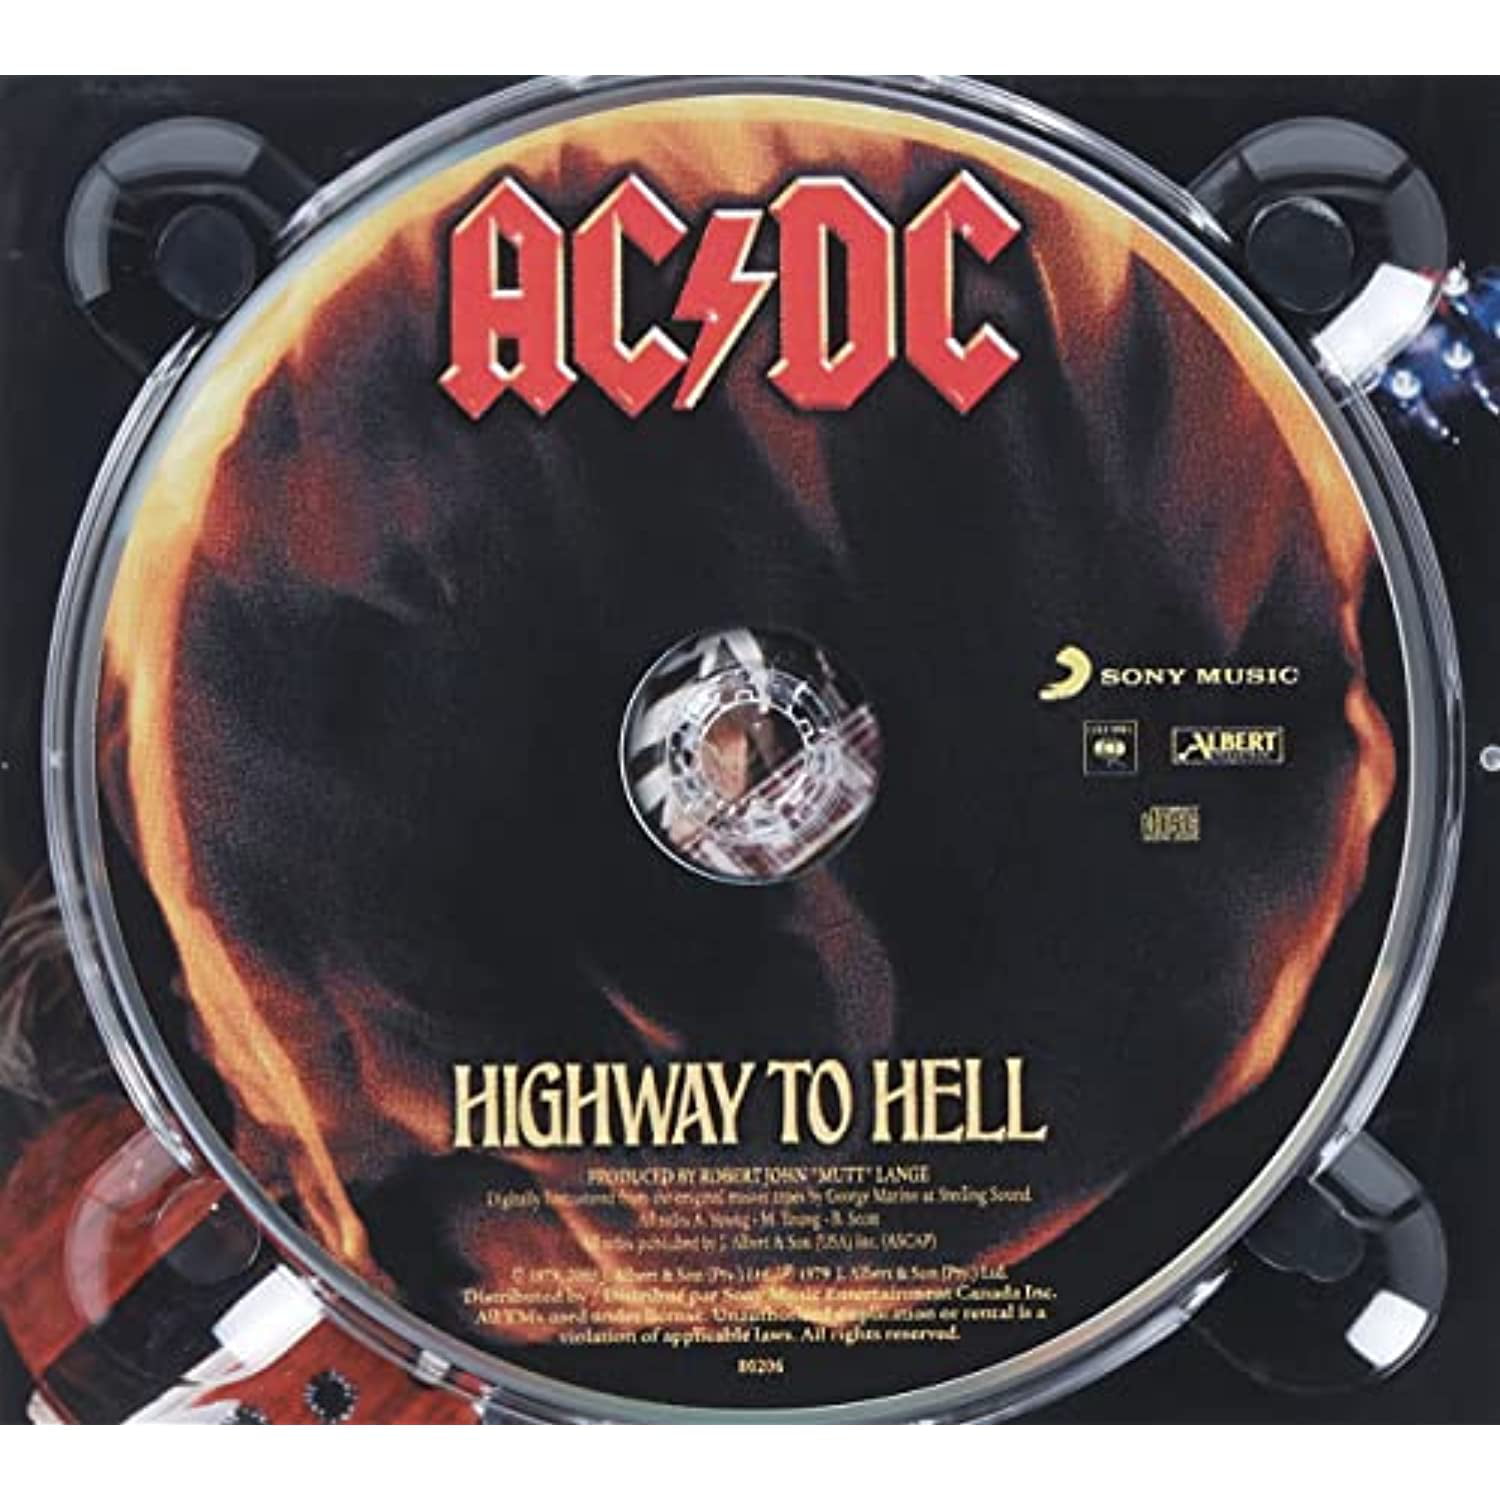 AC/DC (Highway to hell) - Bobby Car, 89,99 €